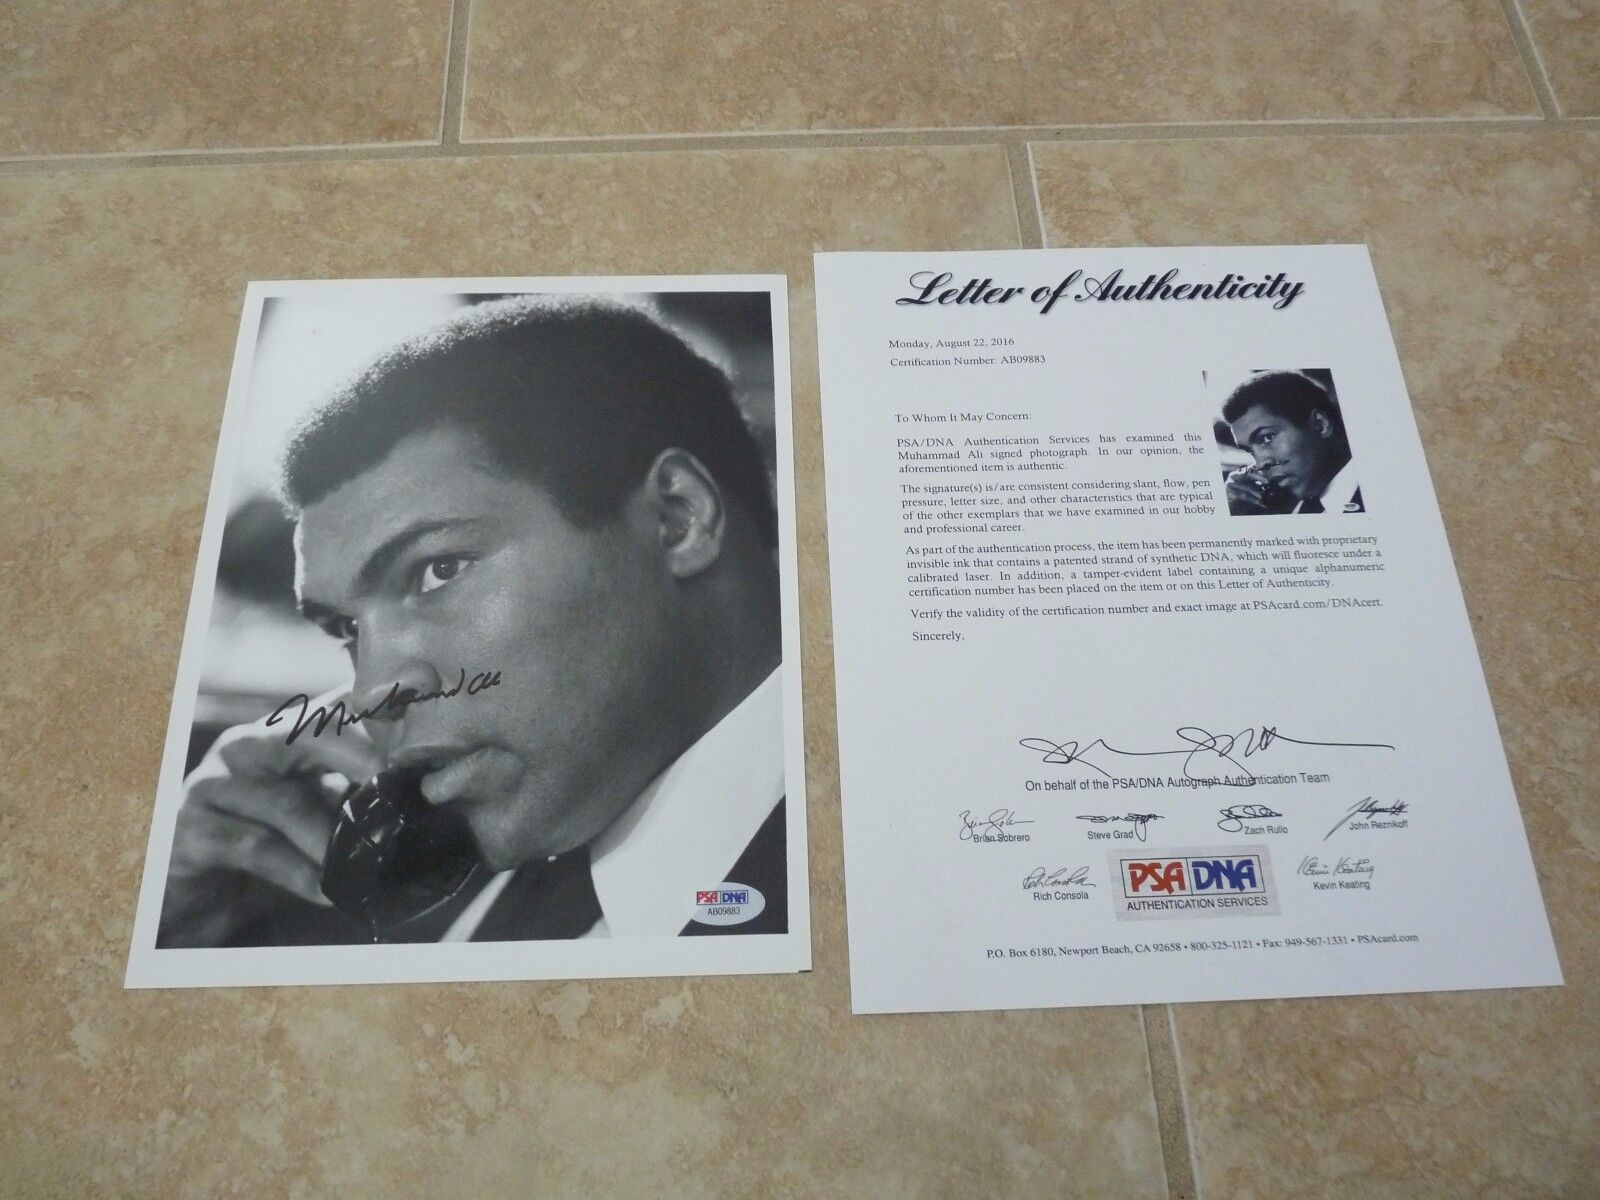 Muhammad Ali Vintage Signed Autographed Boxing 8x10 Photo Poster painting PSA Certified